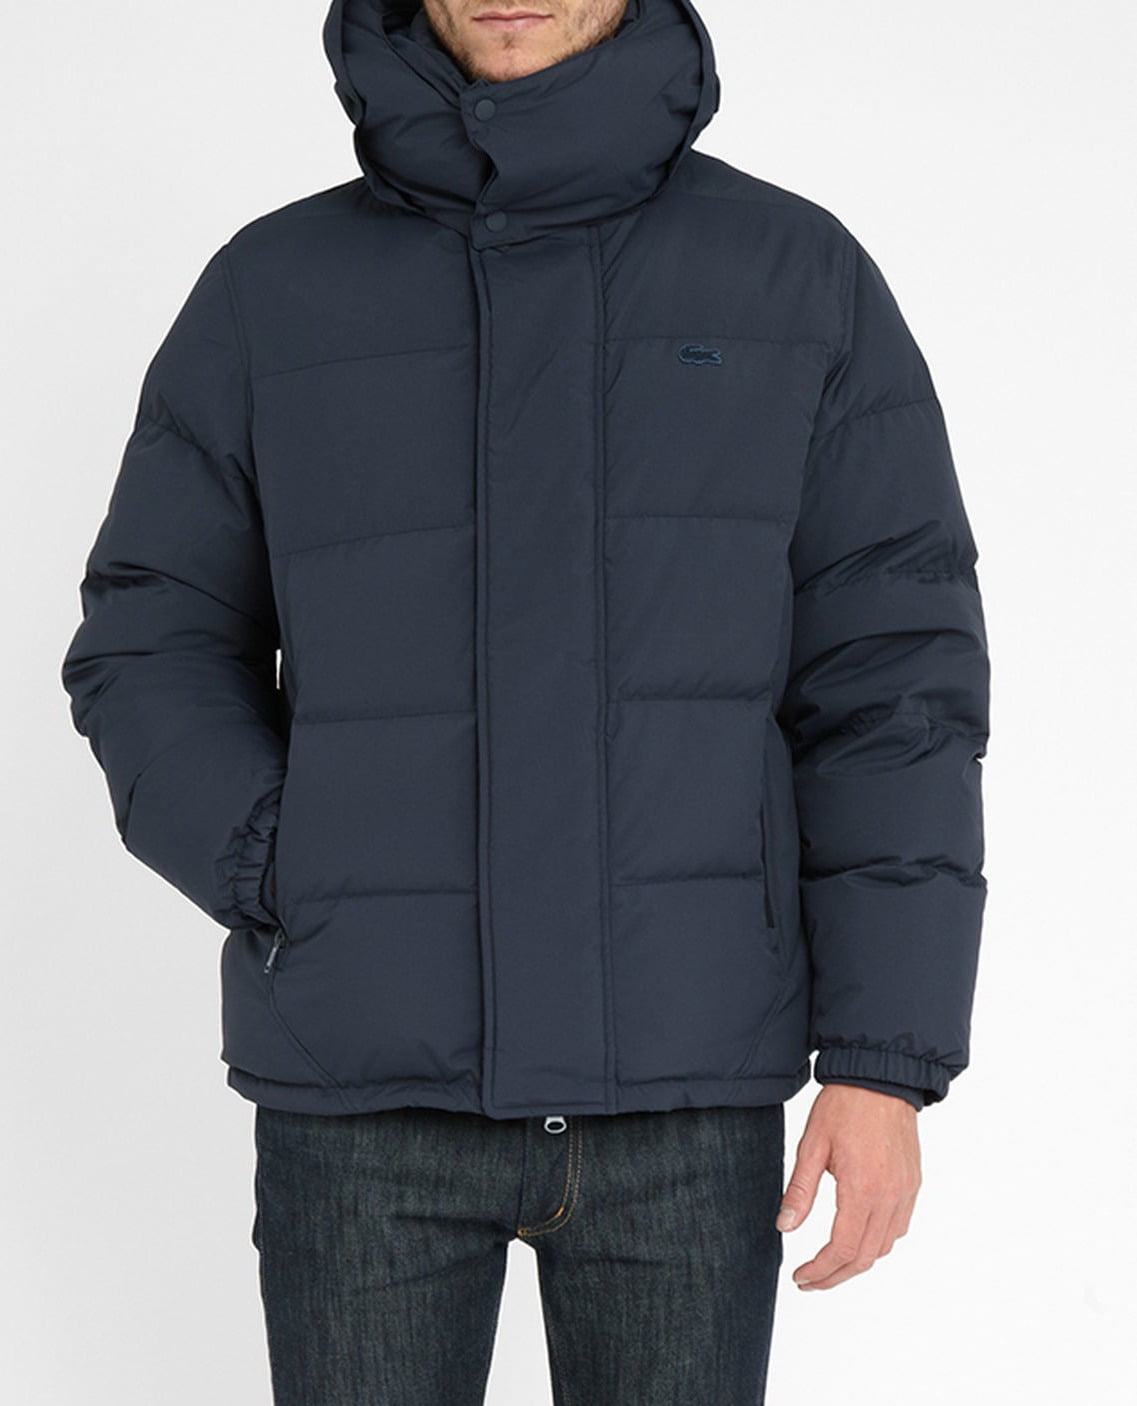 Lacoste - Lacoste NEW Navy Blue Mens Size 54 Full-Zip Hooded Puffer ...